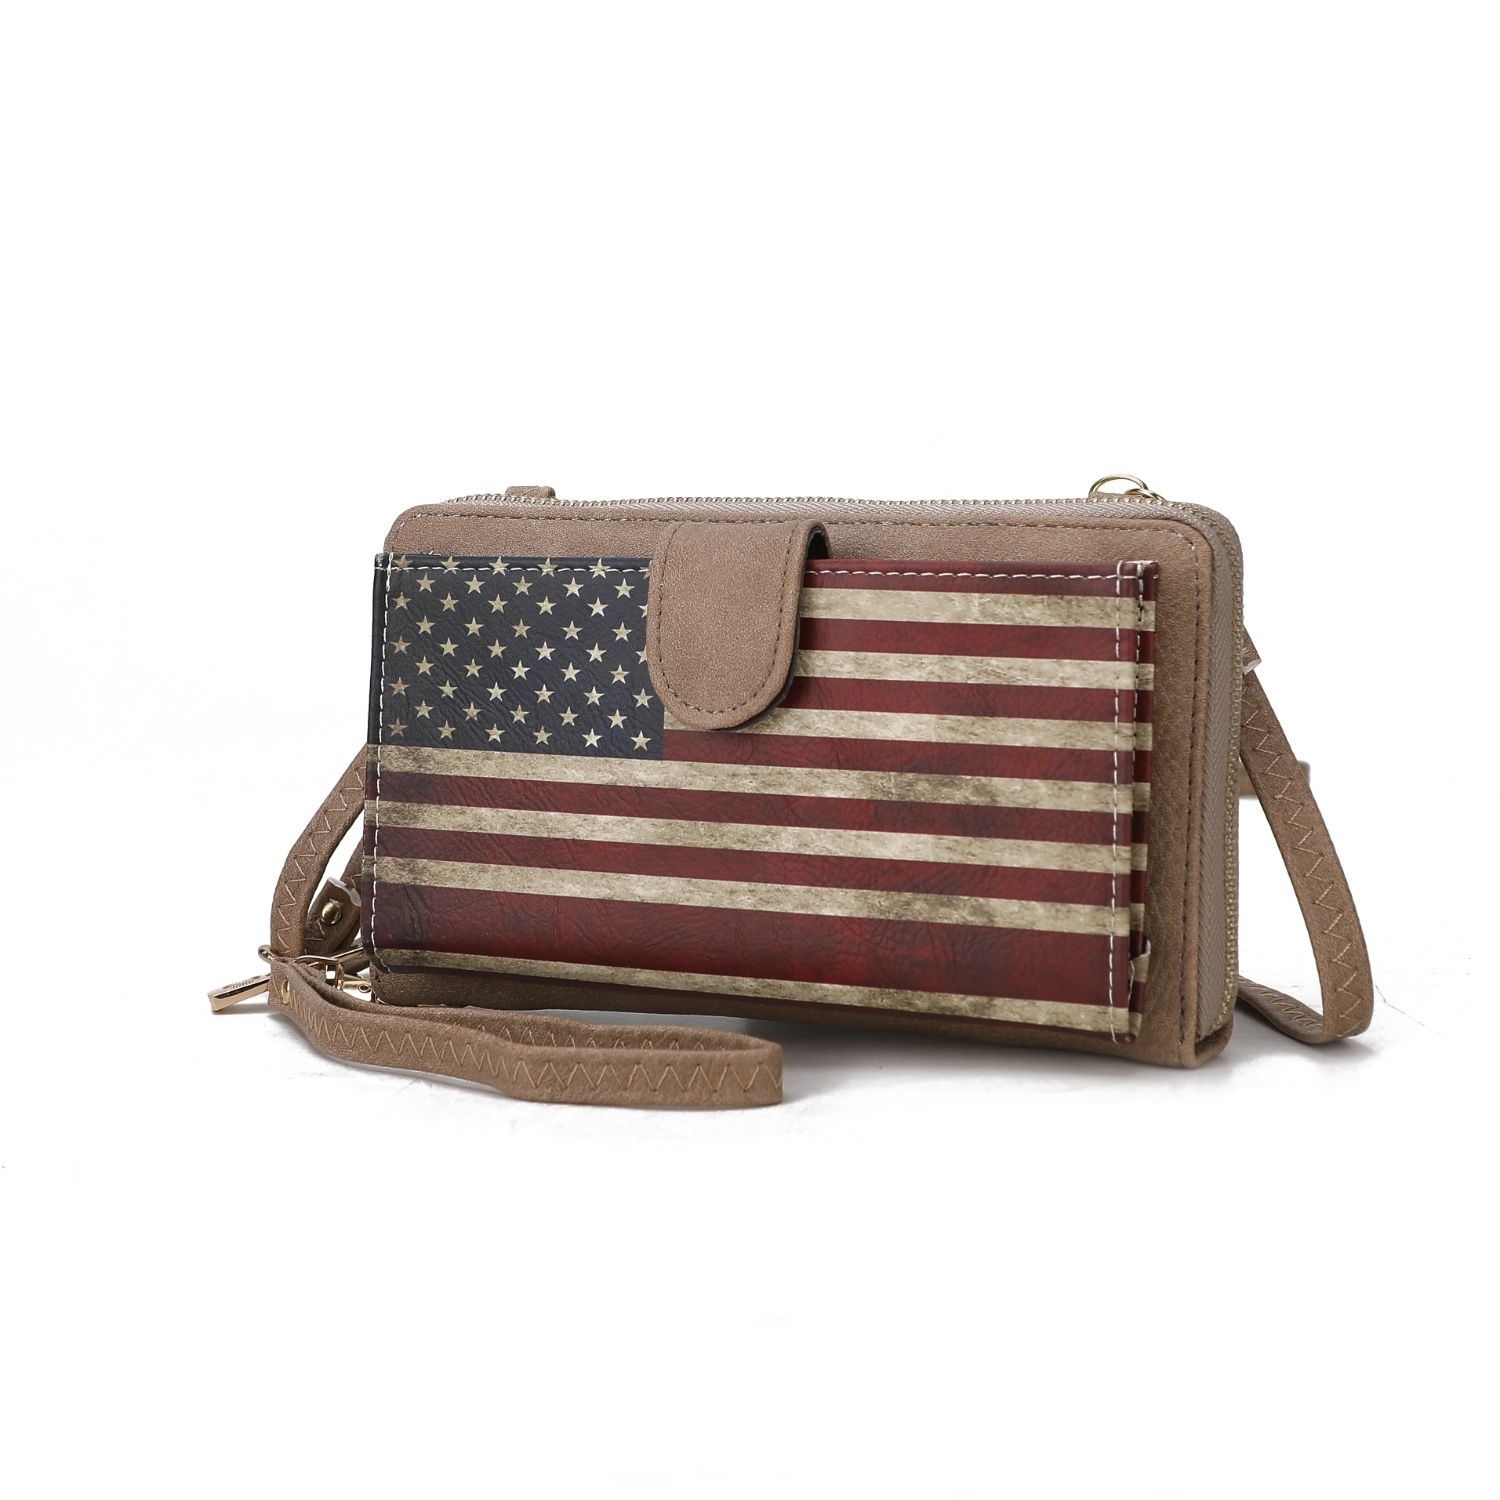 MKF Collection Kiara Smartphone And Wallet Convertible FLAG Crossbody Bag By Mia K - Taupe